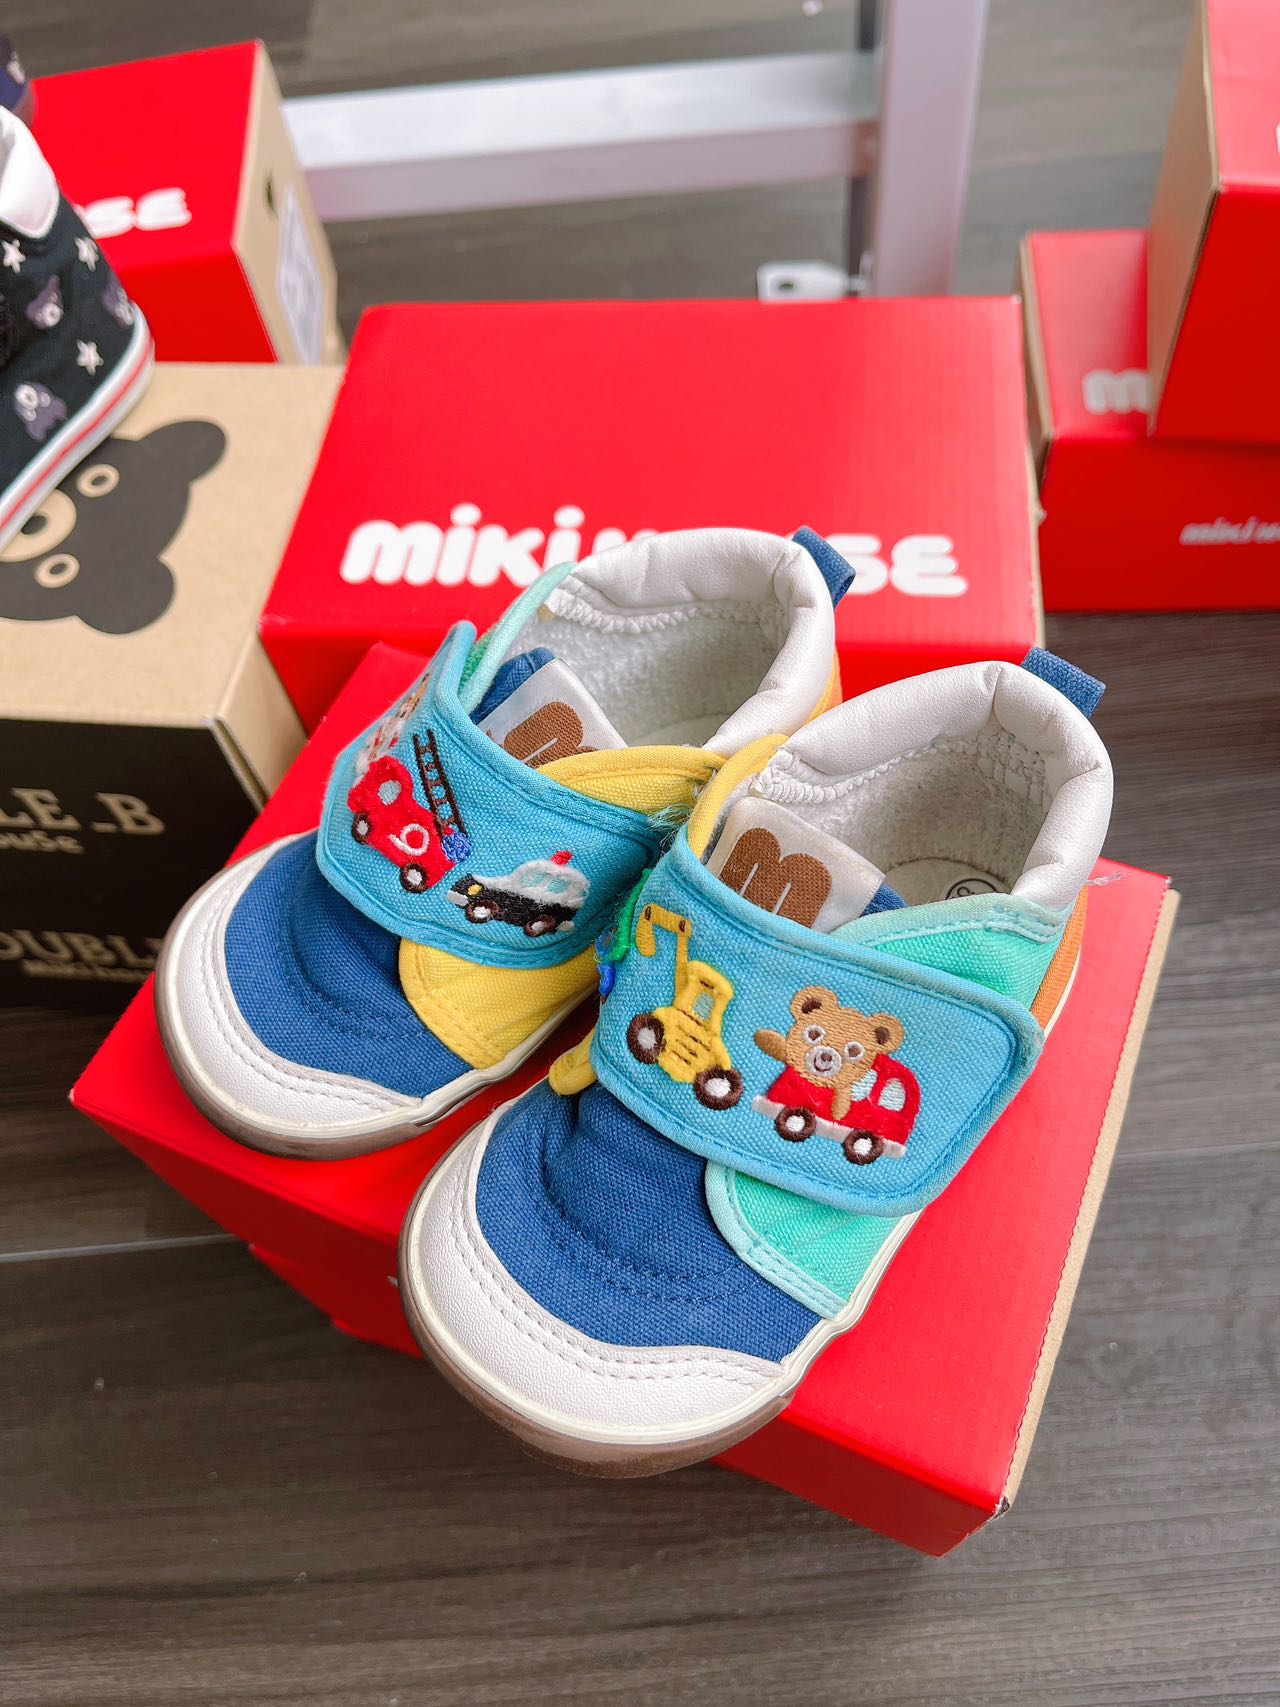 Mikihouse Shoes（US6)-Toddler